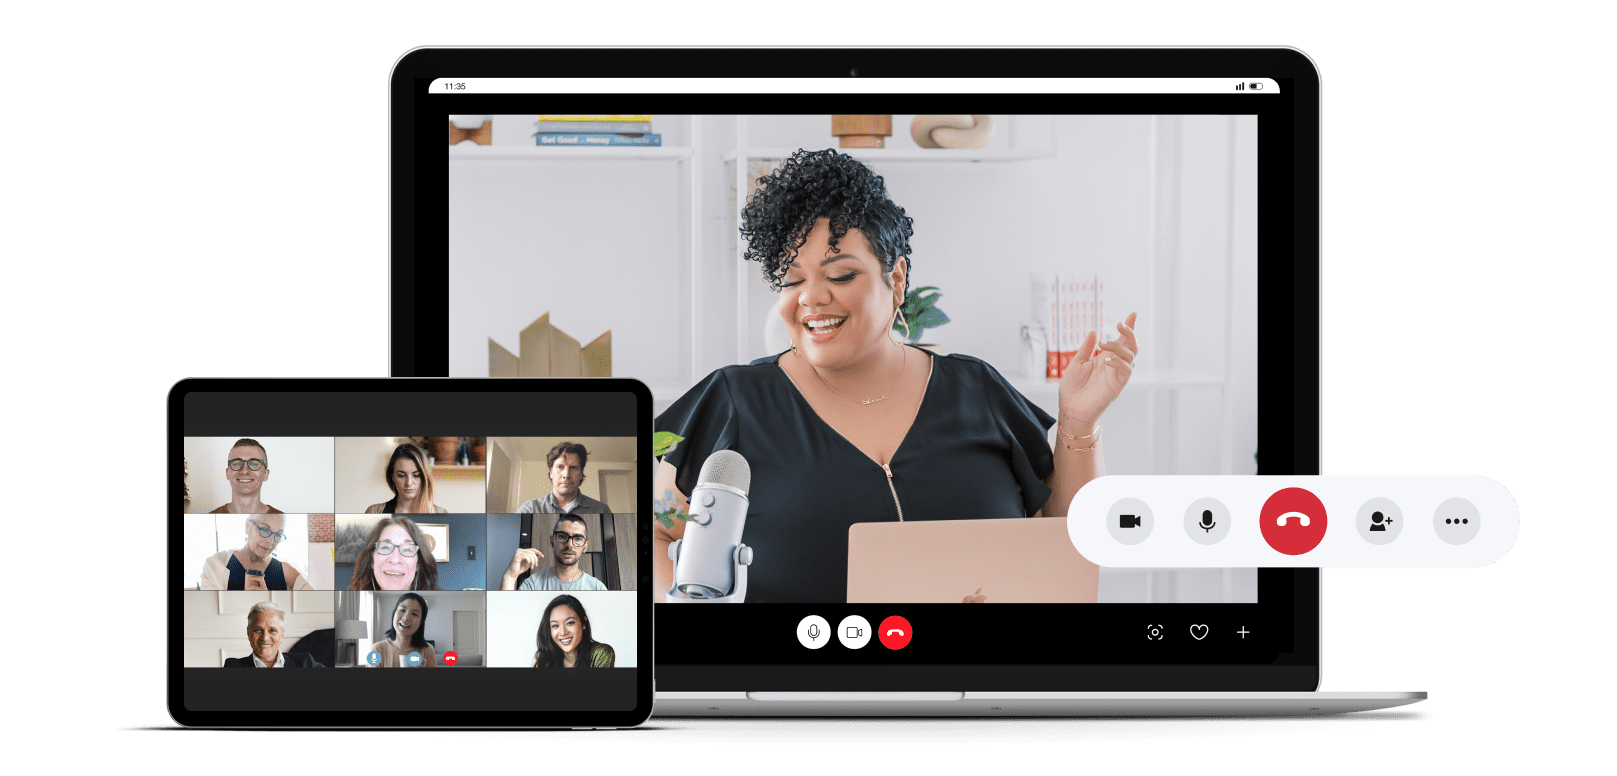 Community Influencer Academy By Aarin Chung - Free Download Course